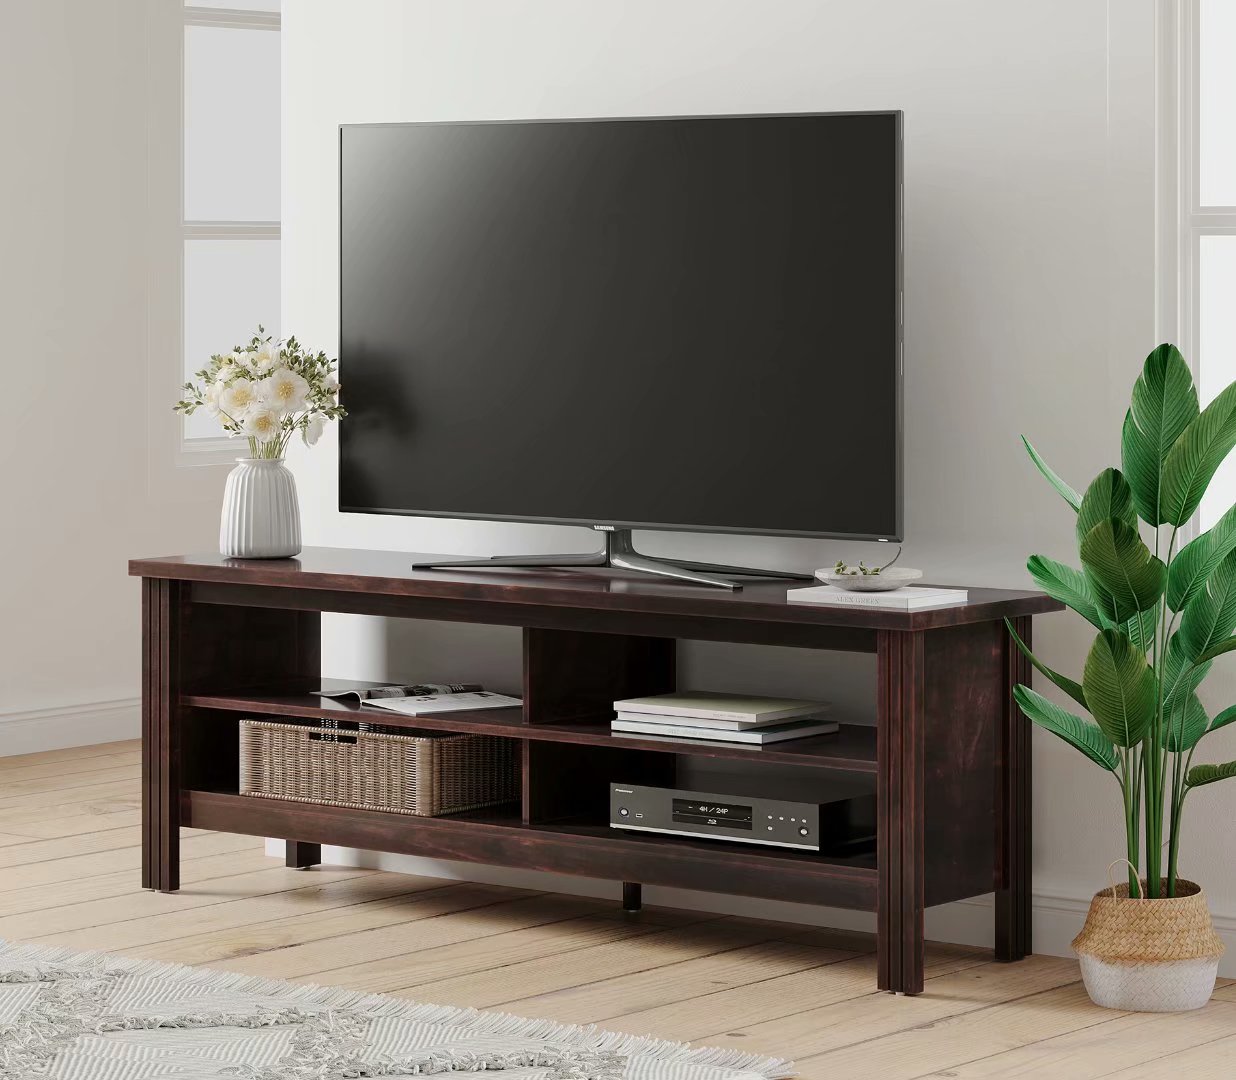 Farmhouse TV Stands for 65 inch Flat Screen,Wood Media Console for bedroom and living room,59 inch,Walnut - image 1 of 5